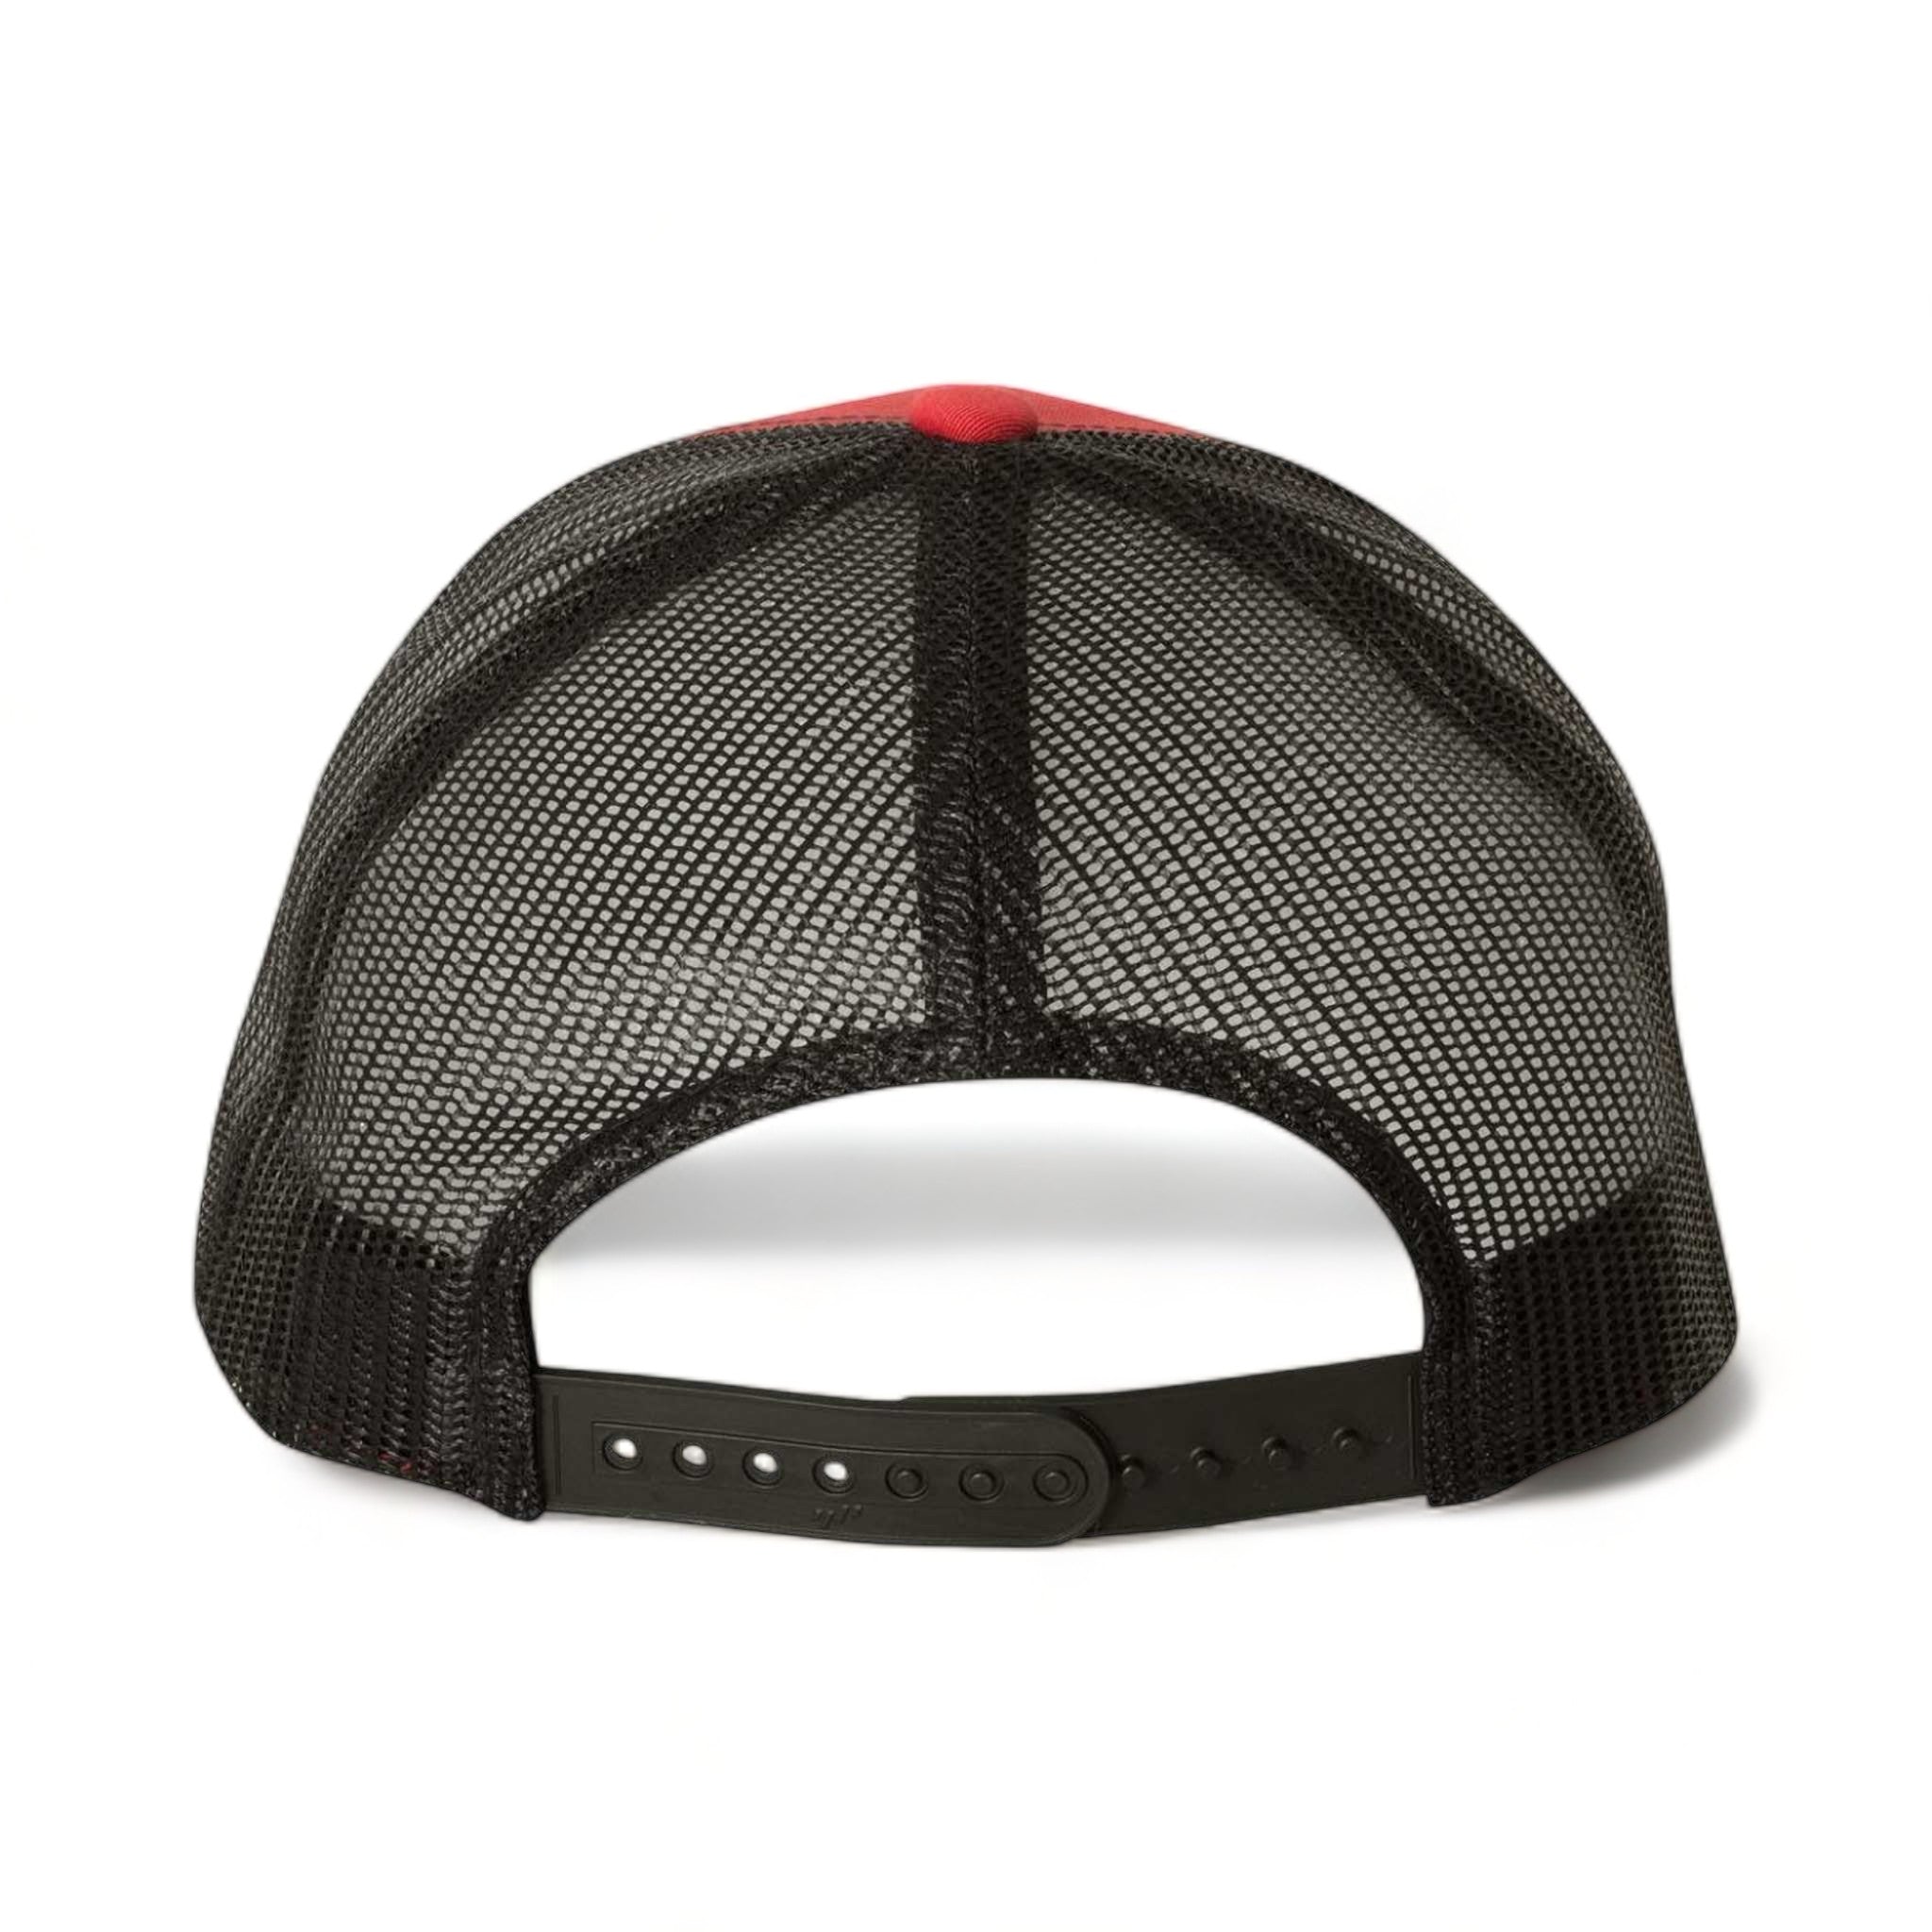 Back view of YP Classics 6606 custom hat in red and black